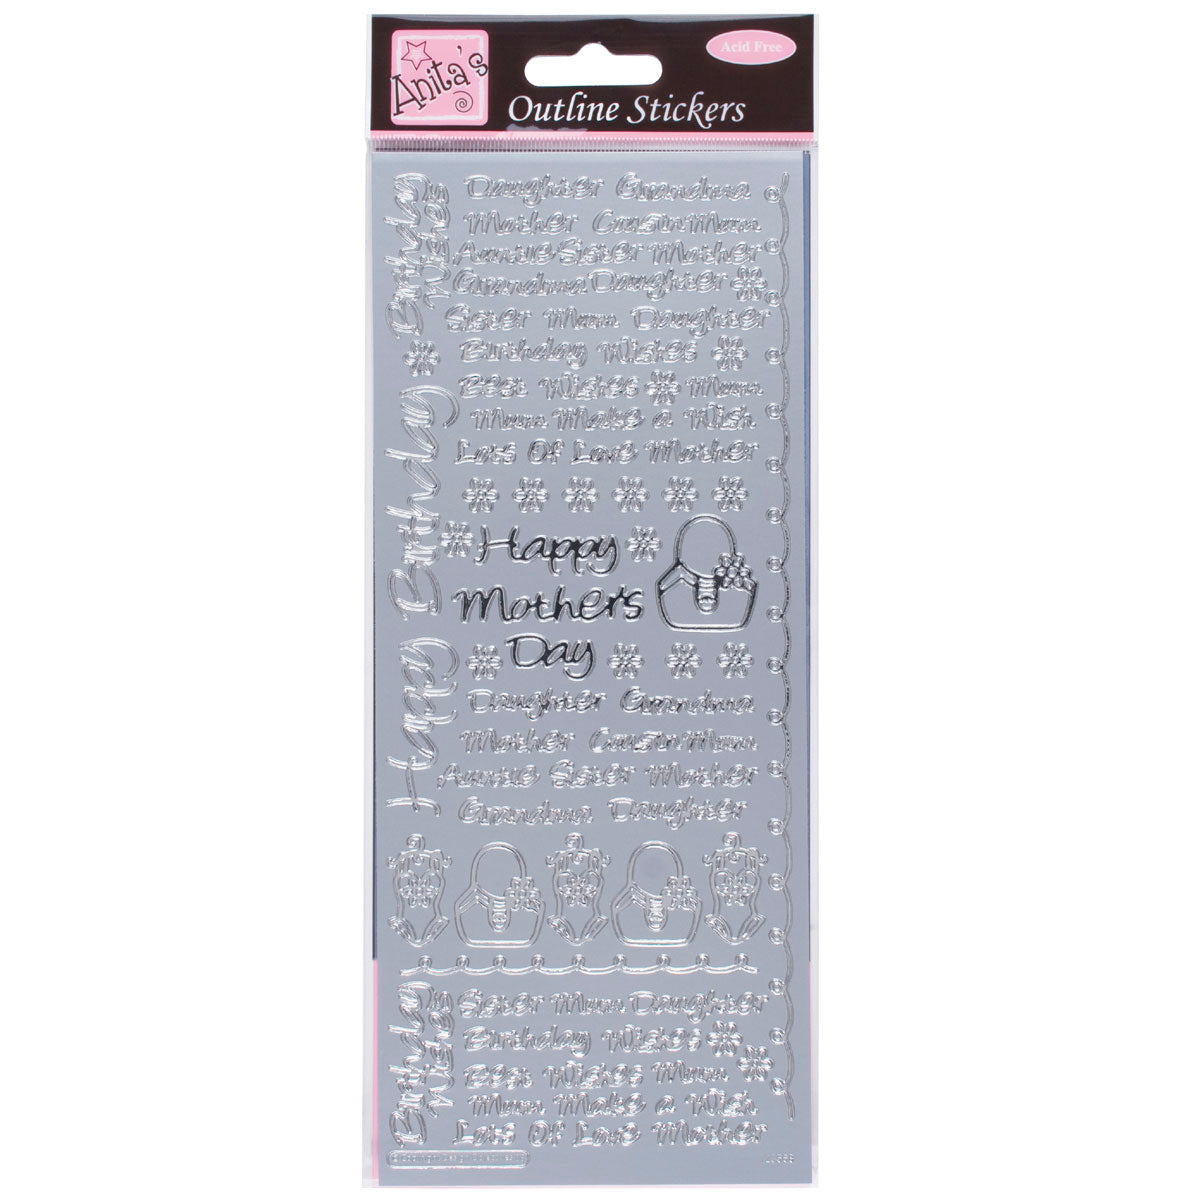 Anitas peel off outline stickers - Female Text Silver